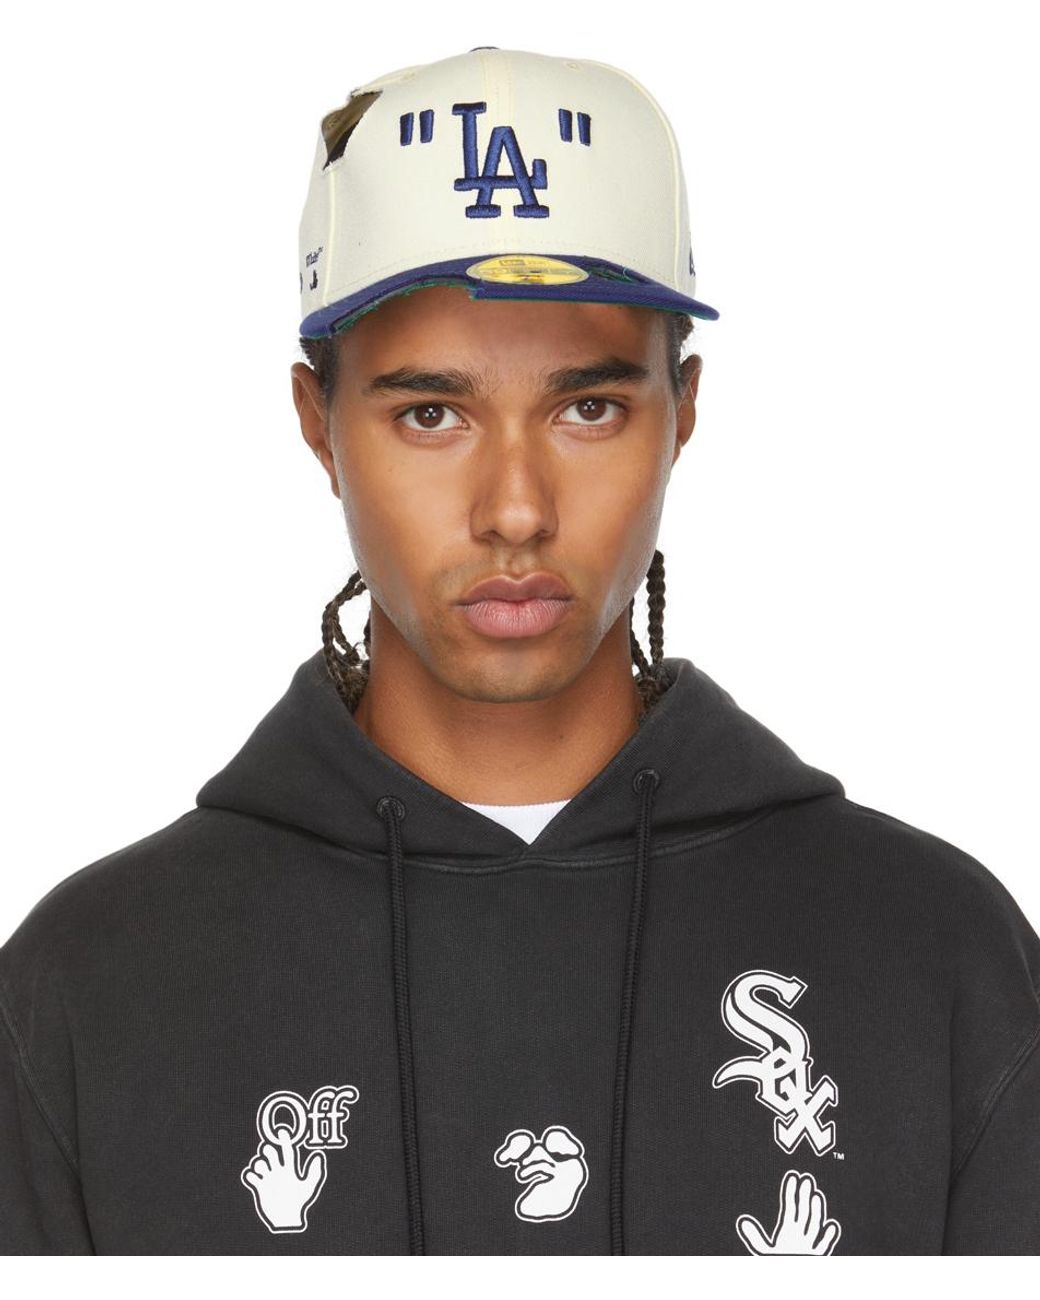 OFF WHITE NEWERA CAP Los Angeles Dodgers